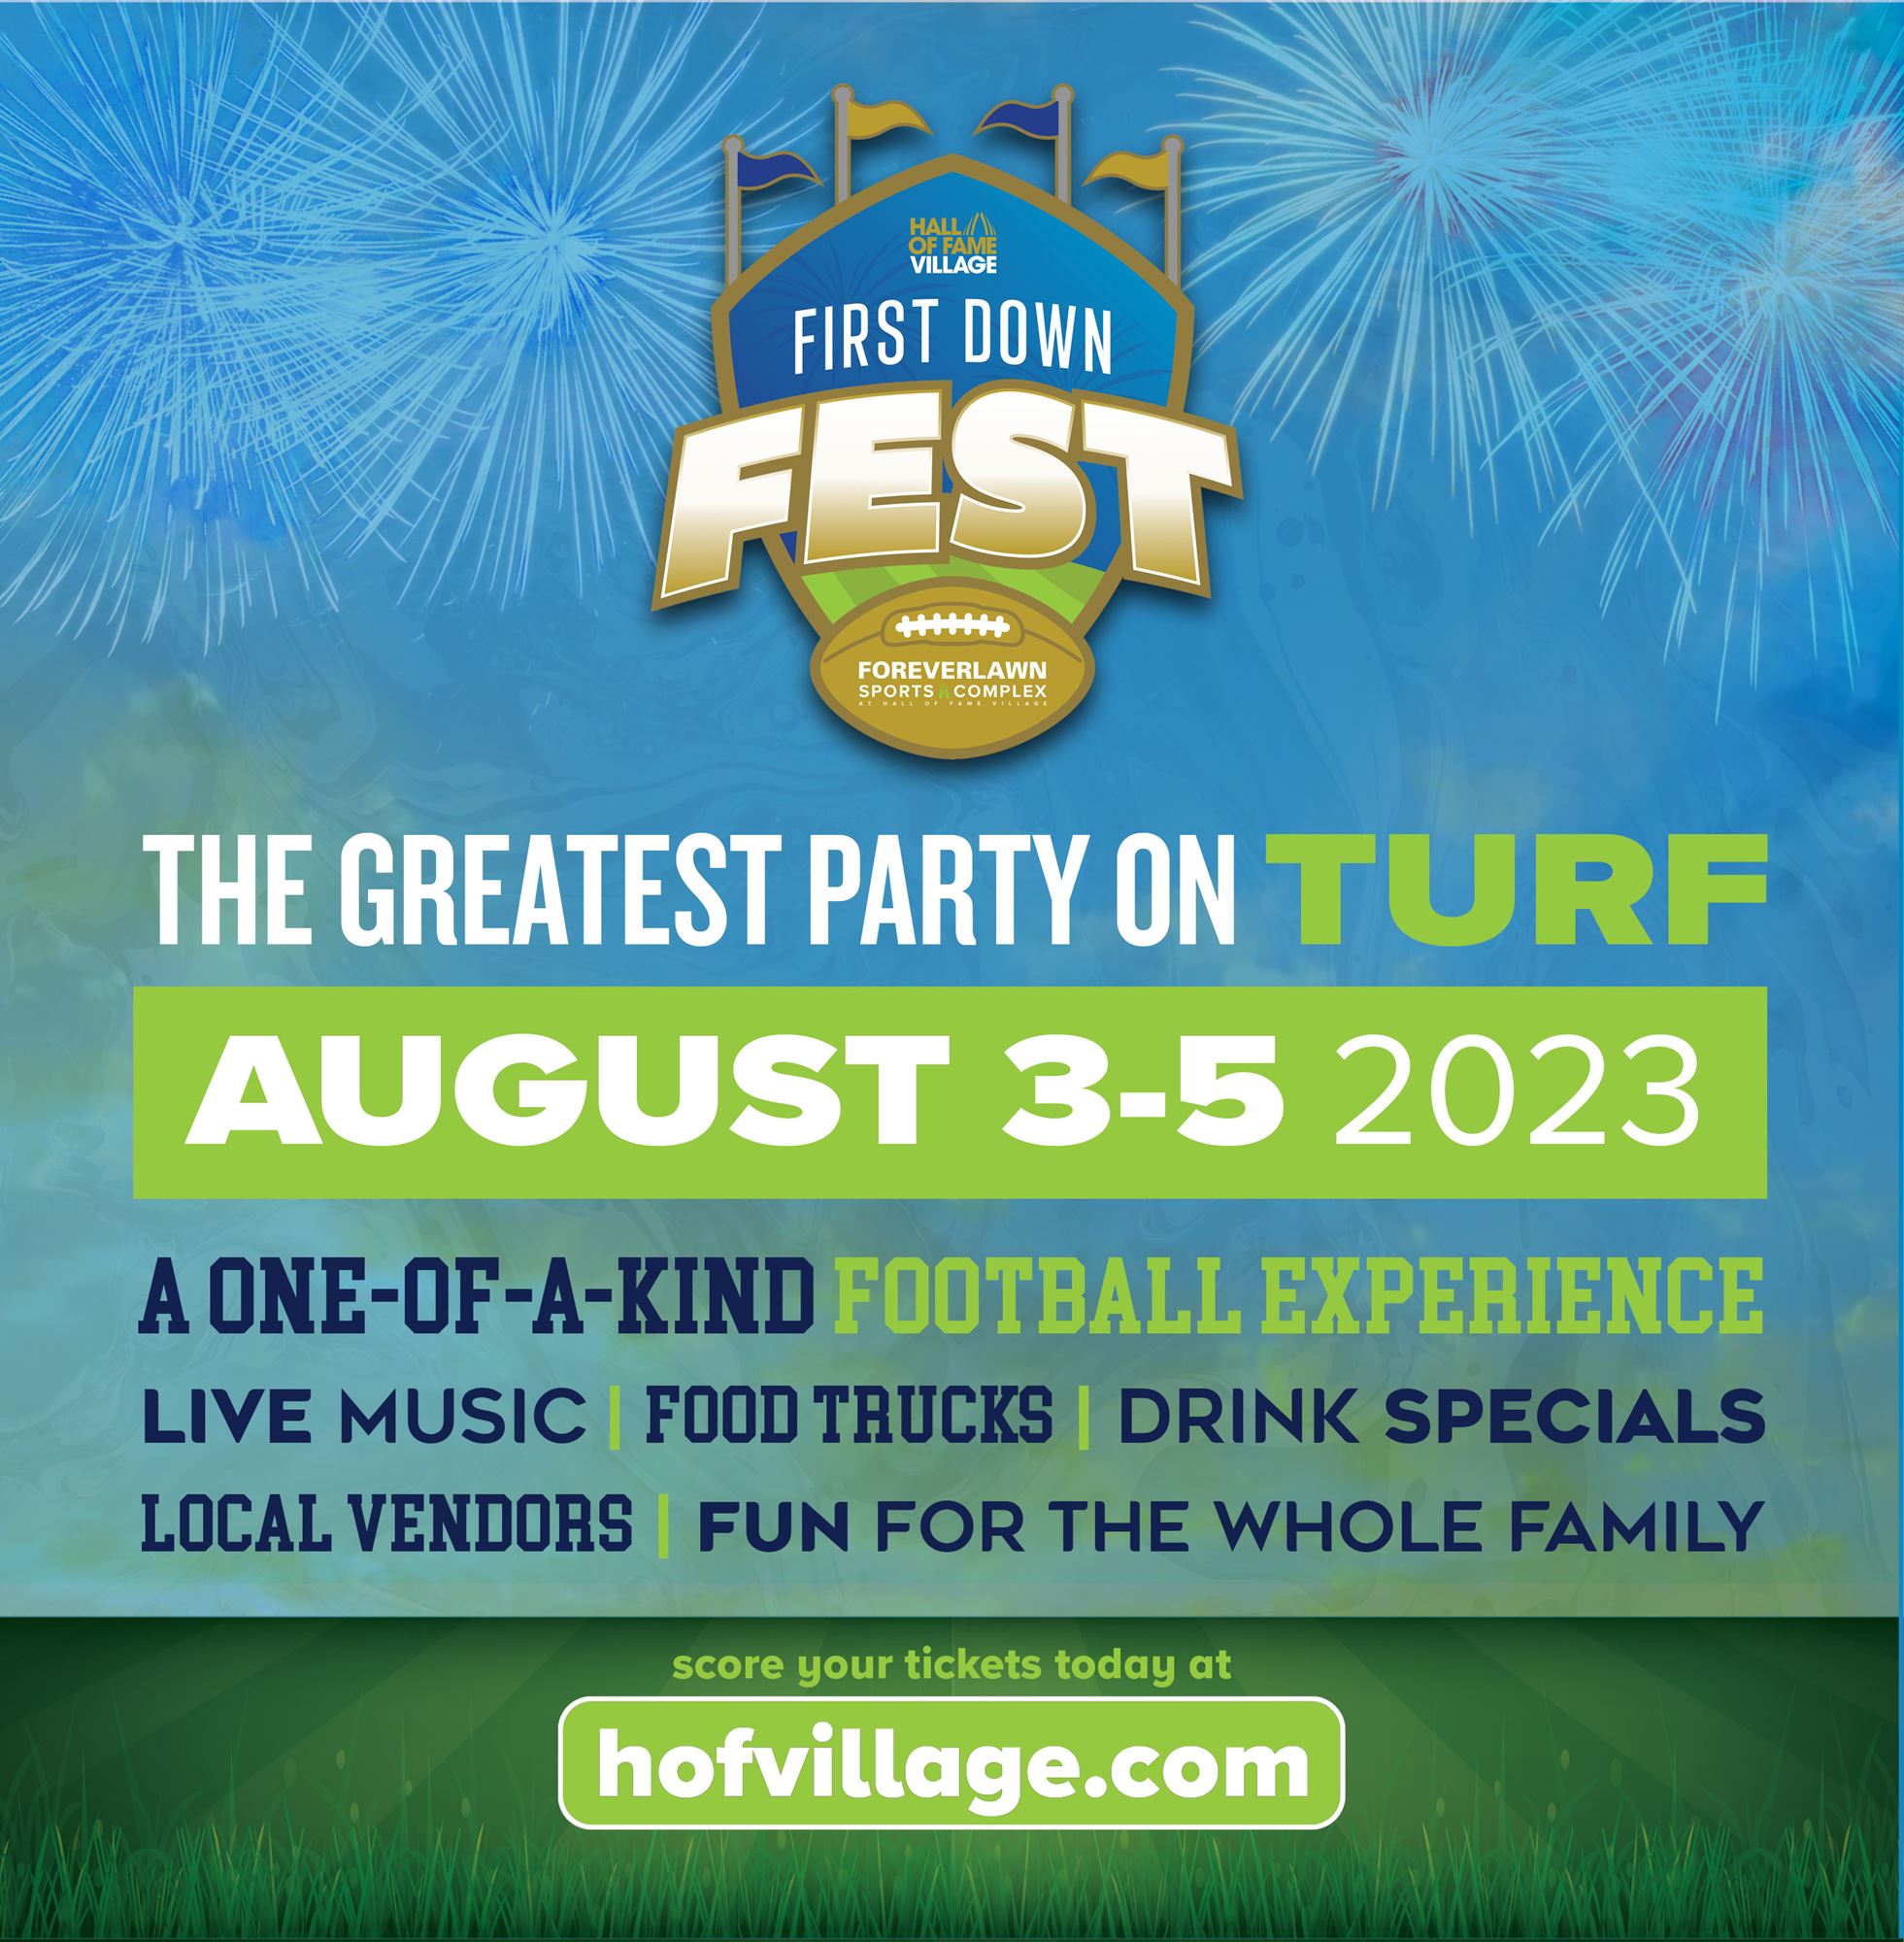 Hall Of Fame Village Unveils Exciting Details For The Upcoming 3-Day Fan Festival And Football Experience, First Down Fest